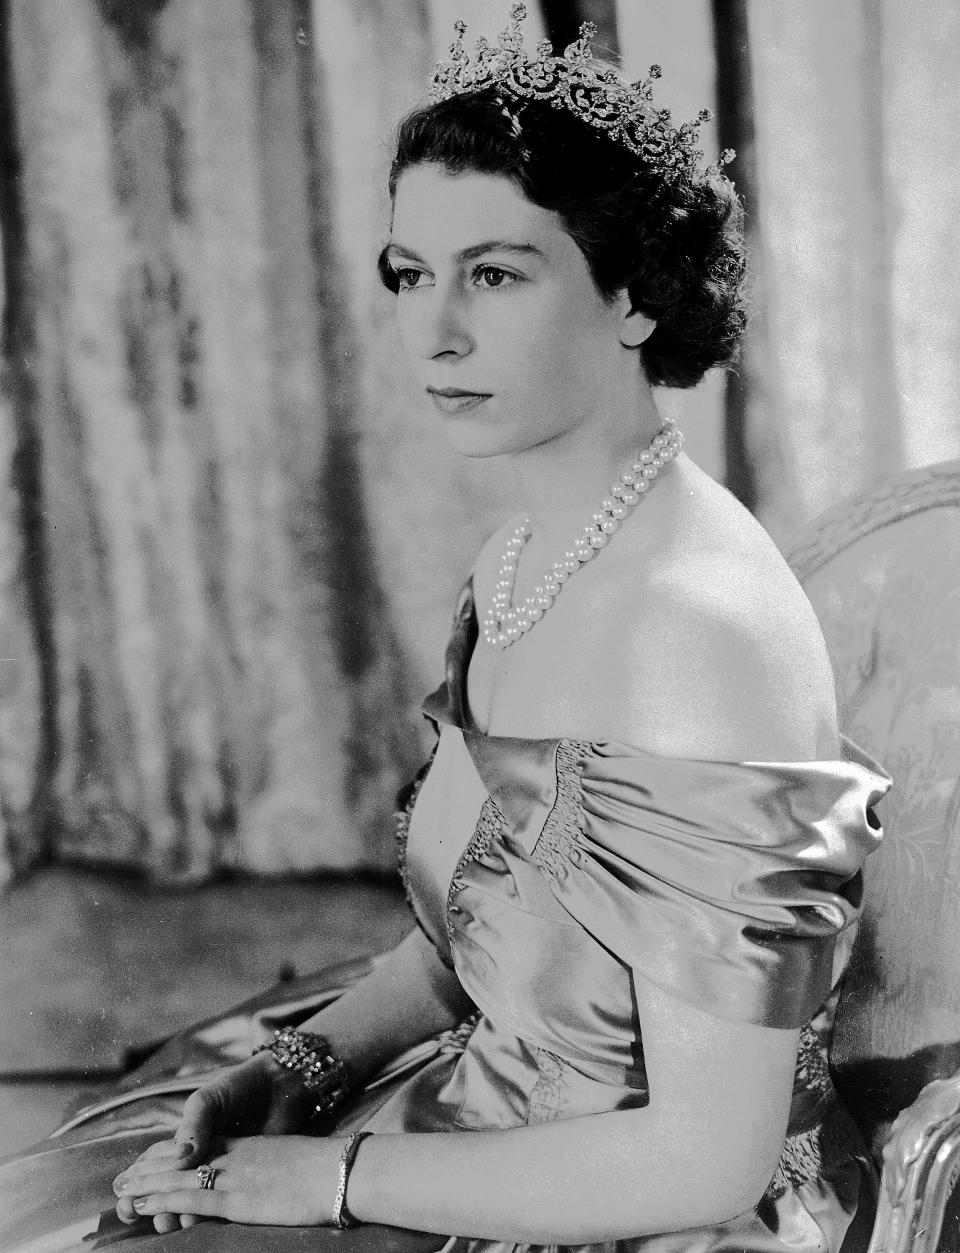 FILE - Britain's Queen Elizabeth II, then Princess Elizabeth, wears a silver gown with a diamond tiara and pearl necklace, in this Aug. 30, 1949 photo. Queen Elizabeth II will mark 70 years on the throne Sunday, Feb. 6, 2022, an unprecedented reign that has made her a symbol of stability as the United Kingdom navigated an age of uncertainty. (AP Photo, File)